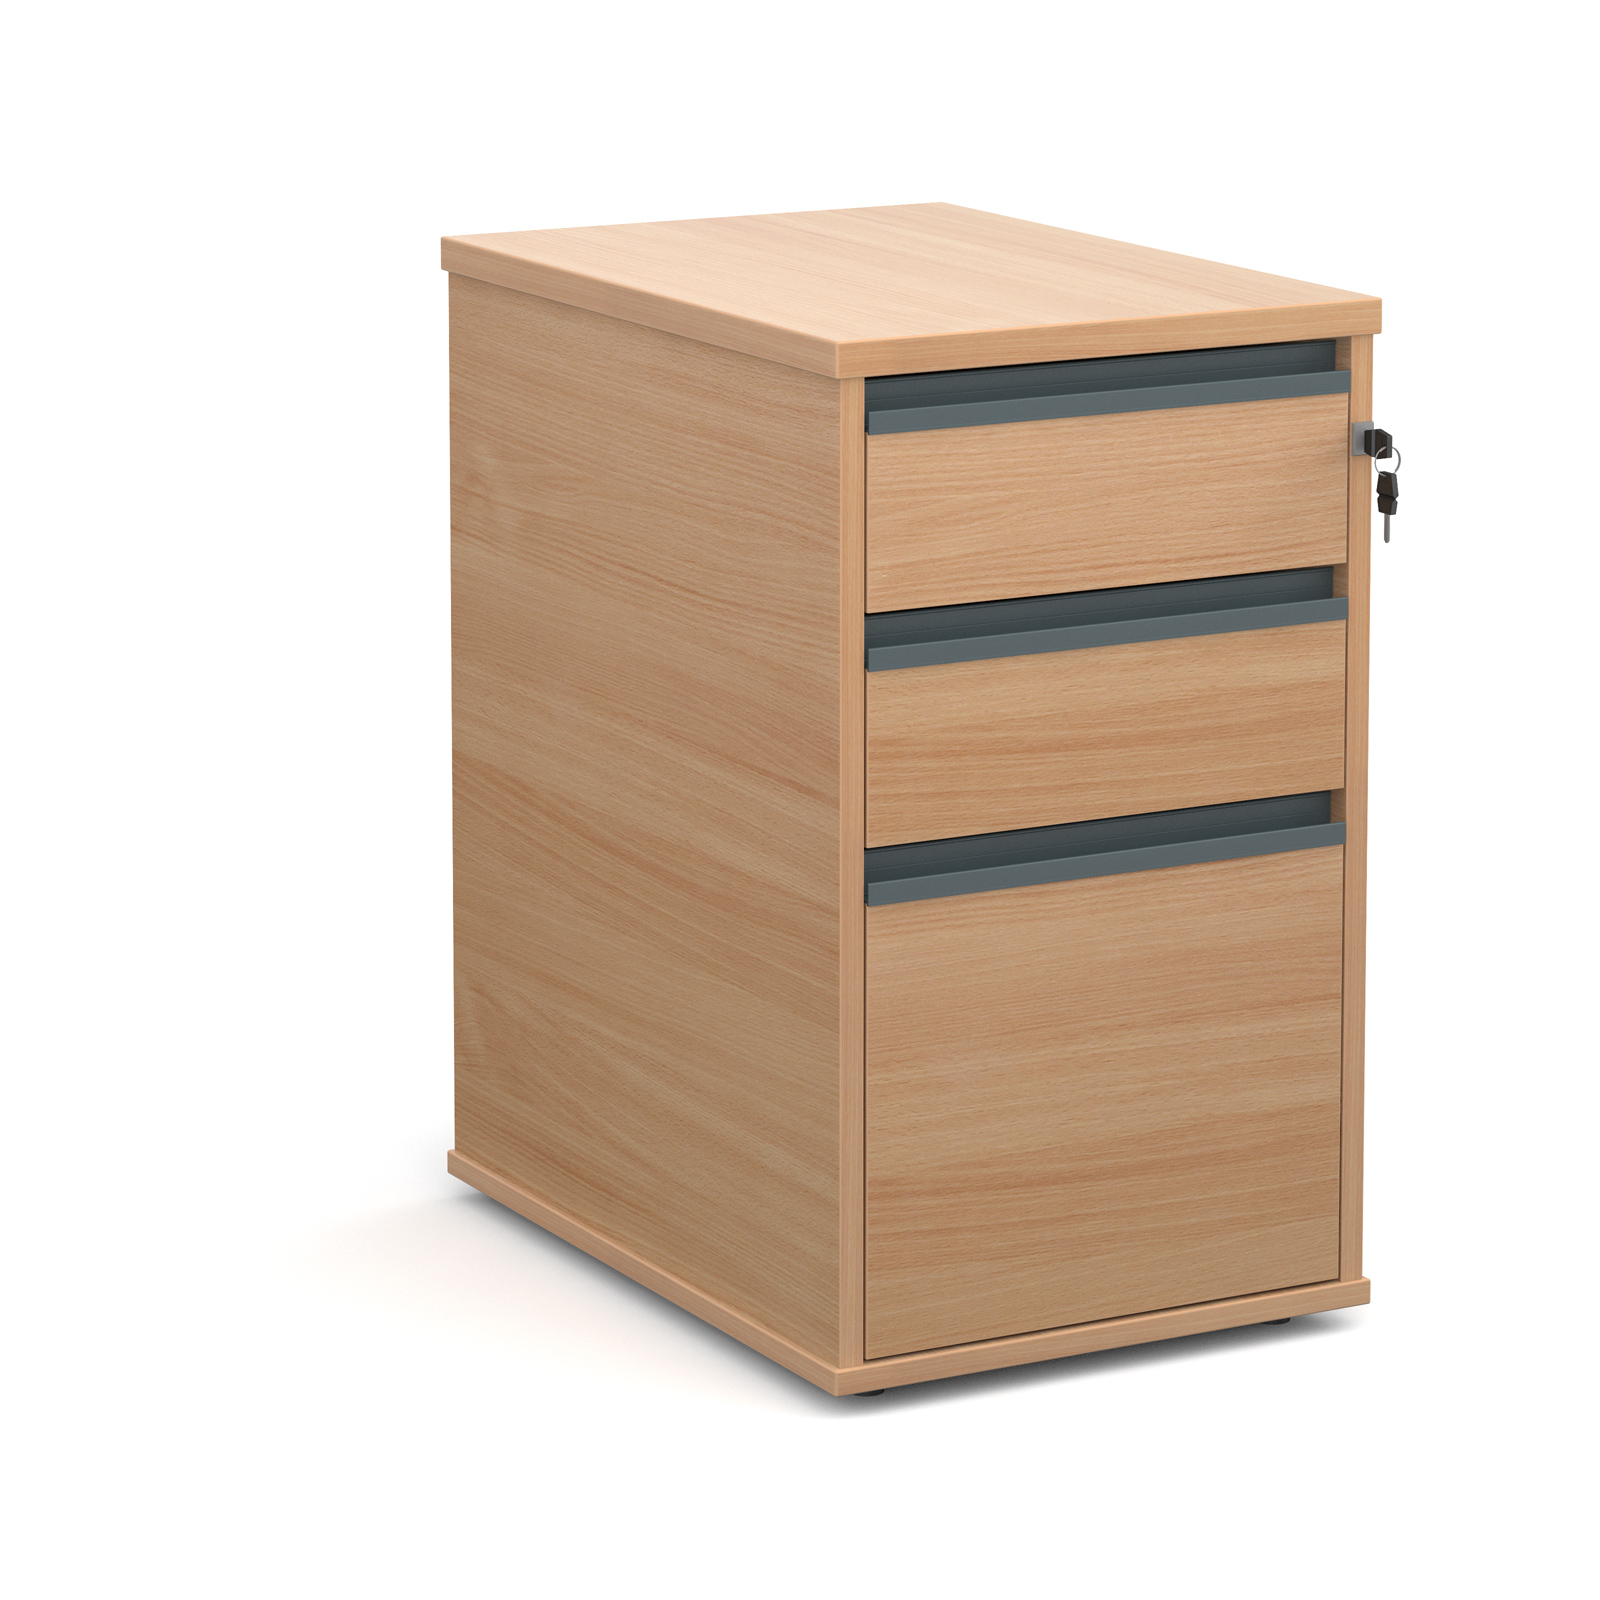 Maestro 3 Drawer Wooden Wood Filing Cabinet Foolscap Beech 